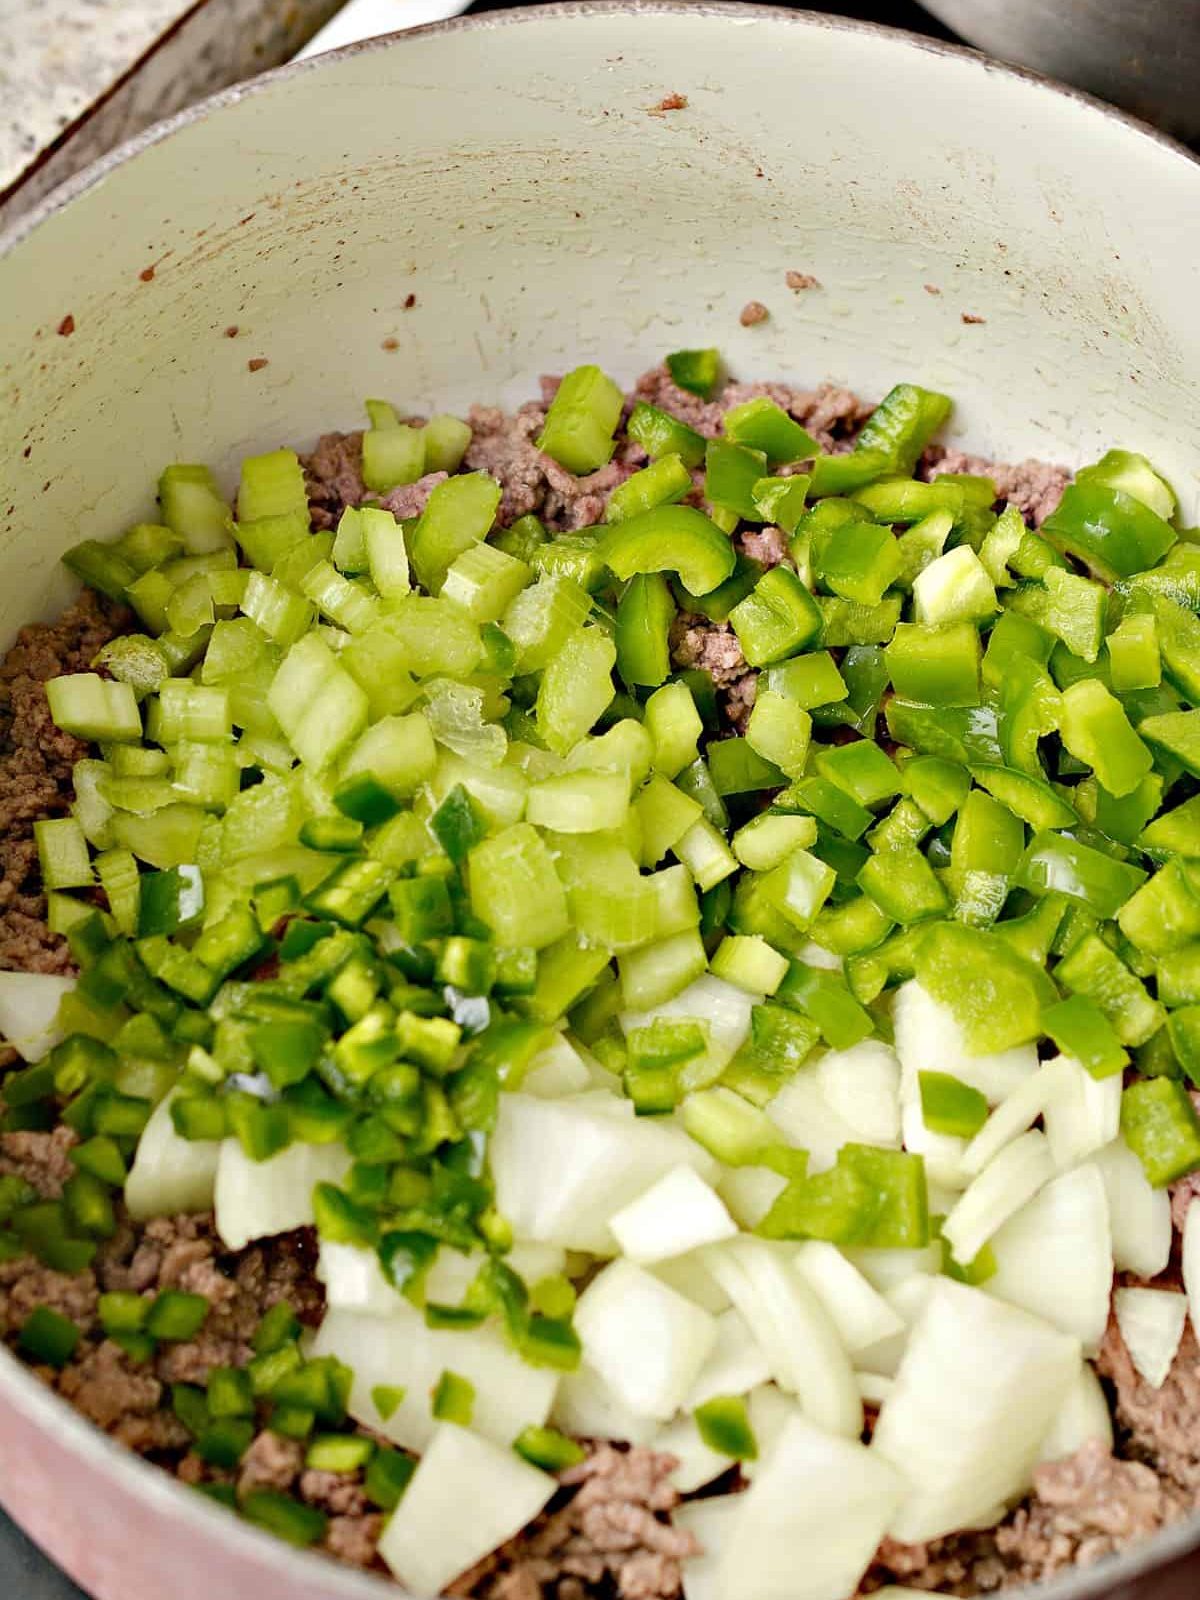 Add 1 bell pepper chopped, 1 onion chopped, and ⅓ cup of celery chopped to the pot.